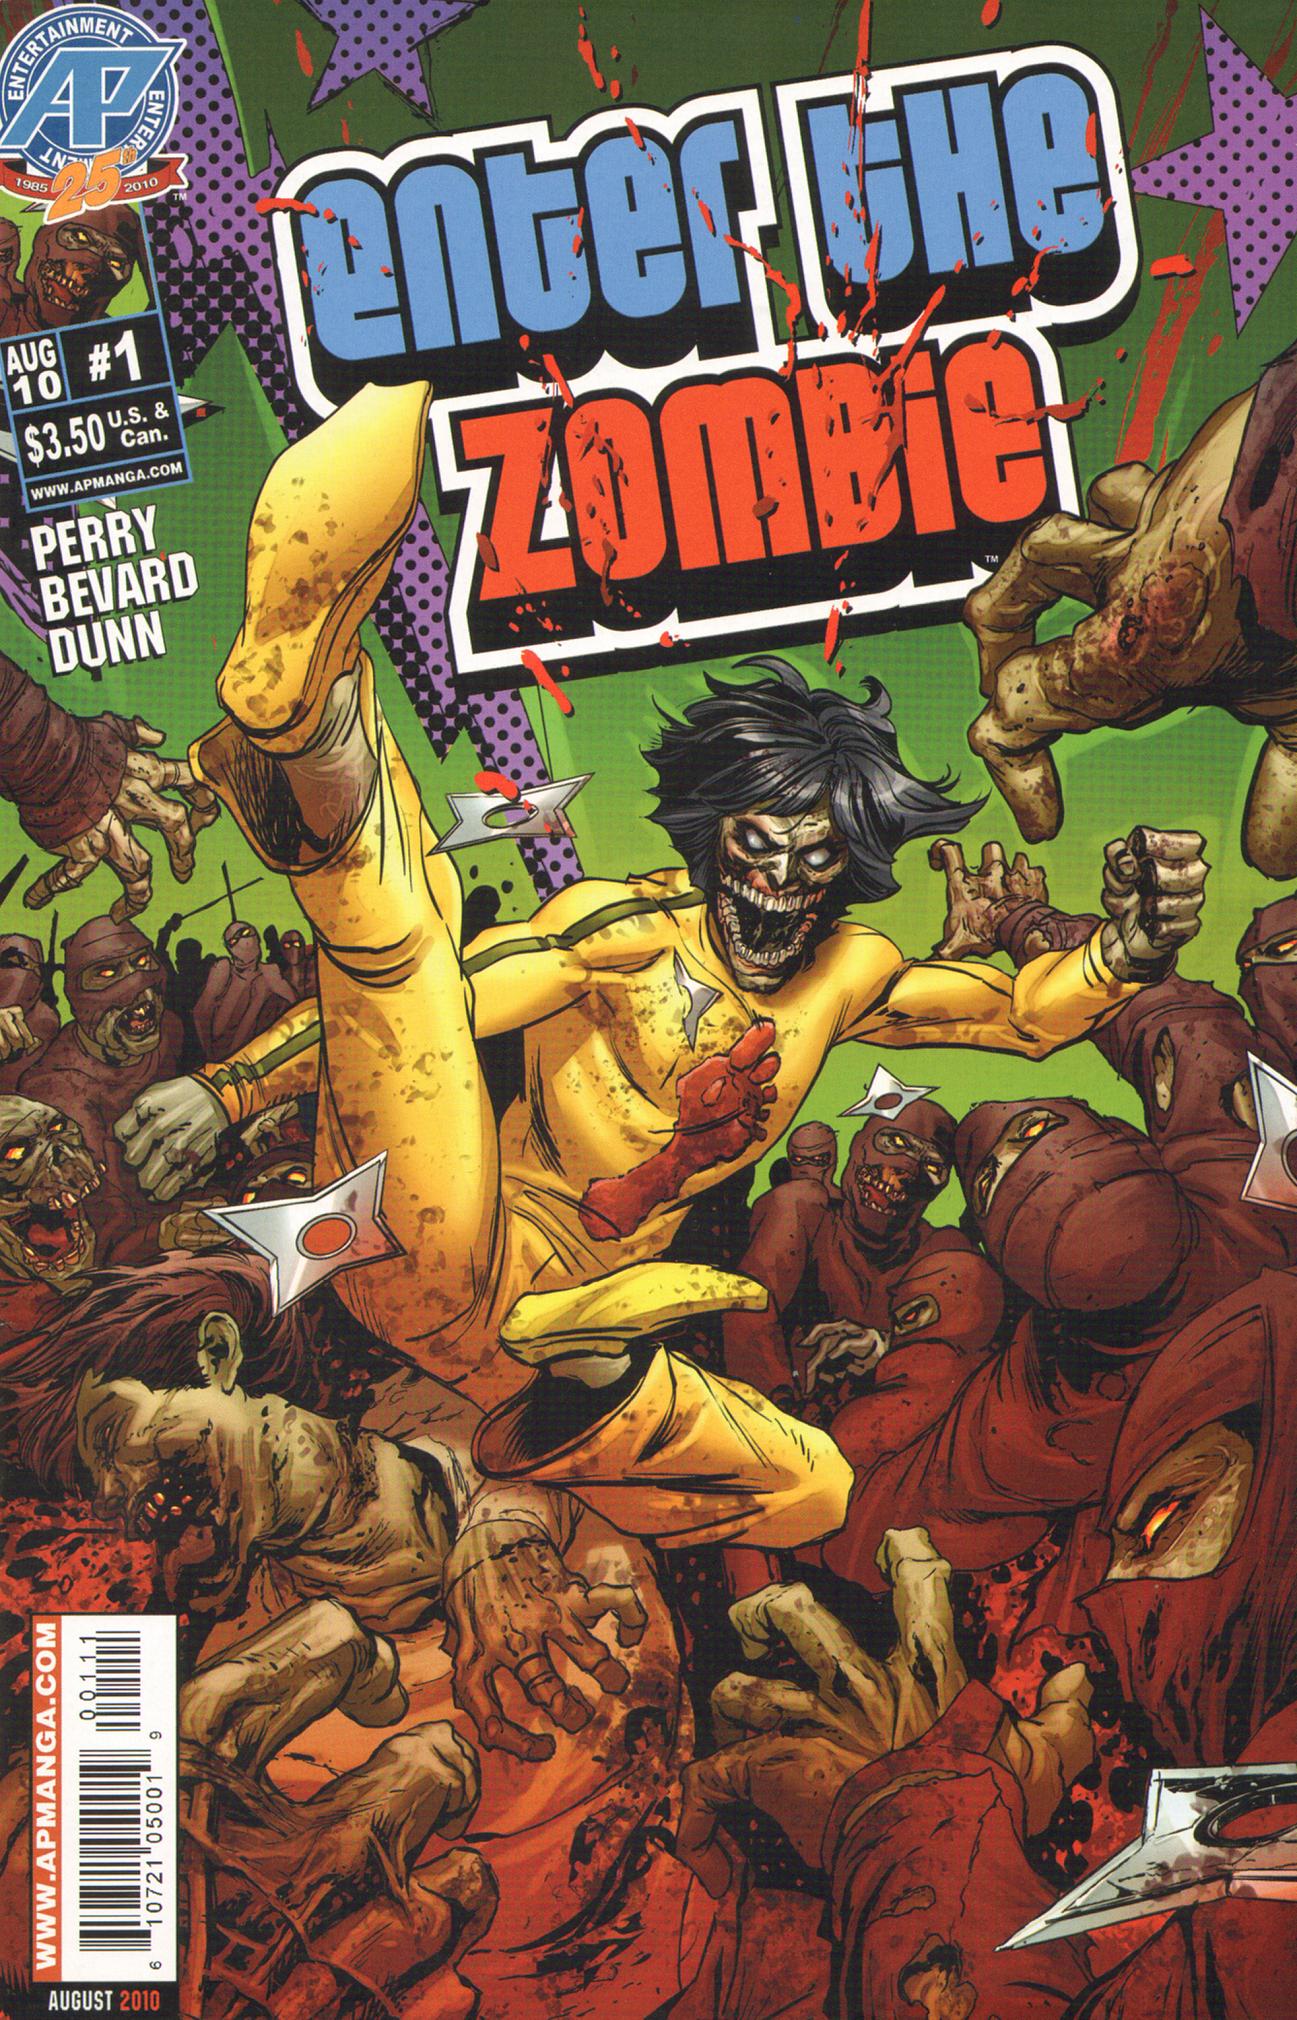 Read online Enter the Zombie comic -  Issue # Full - 1